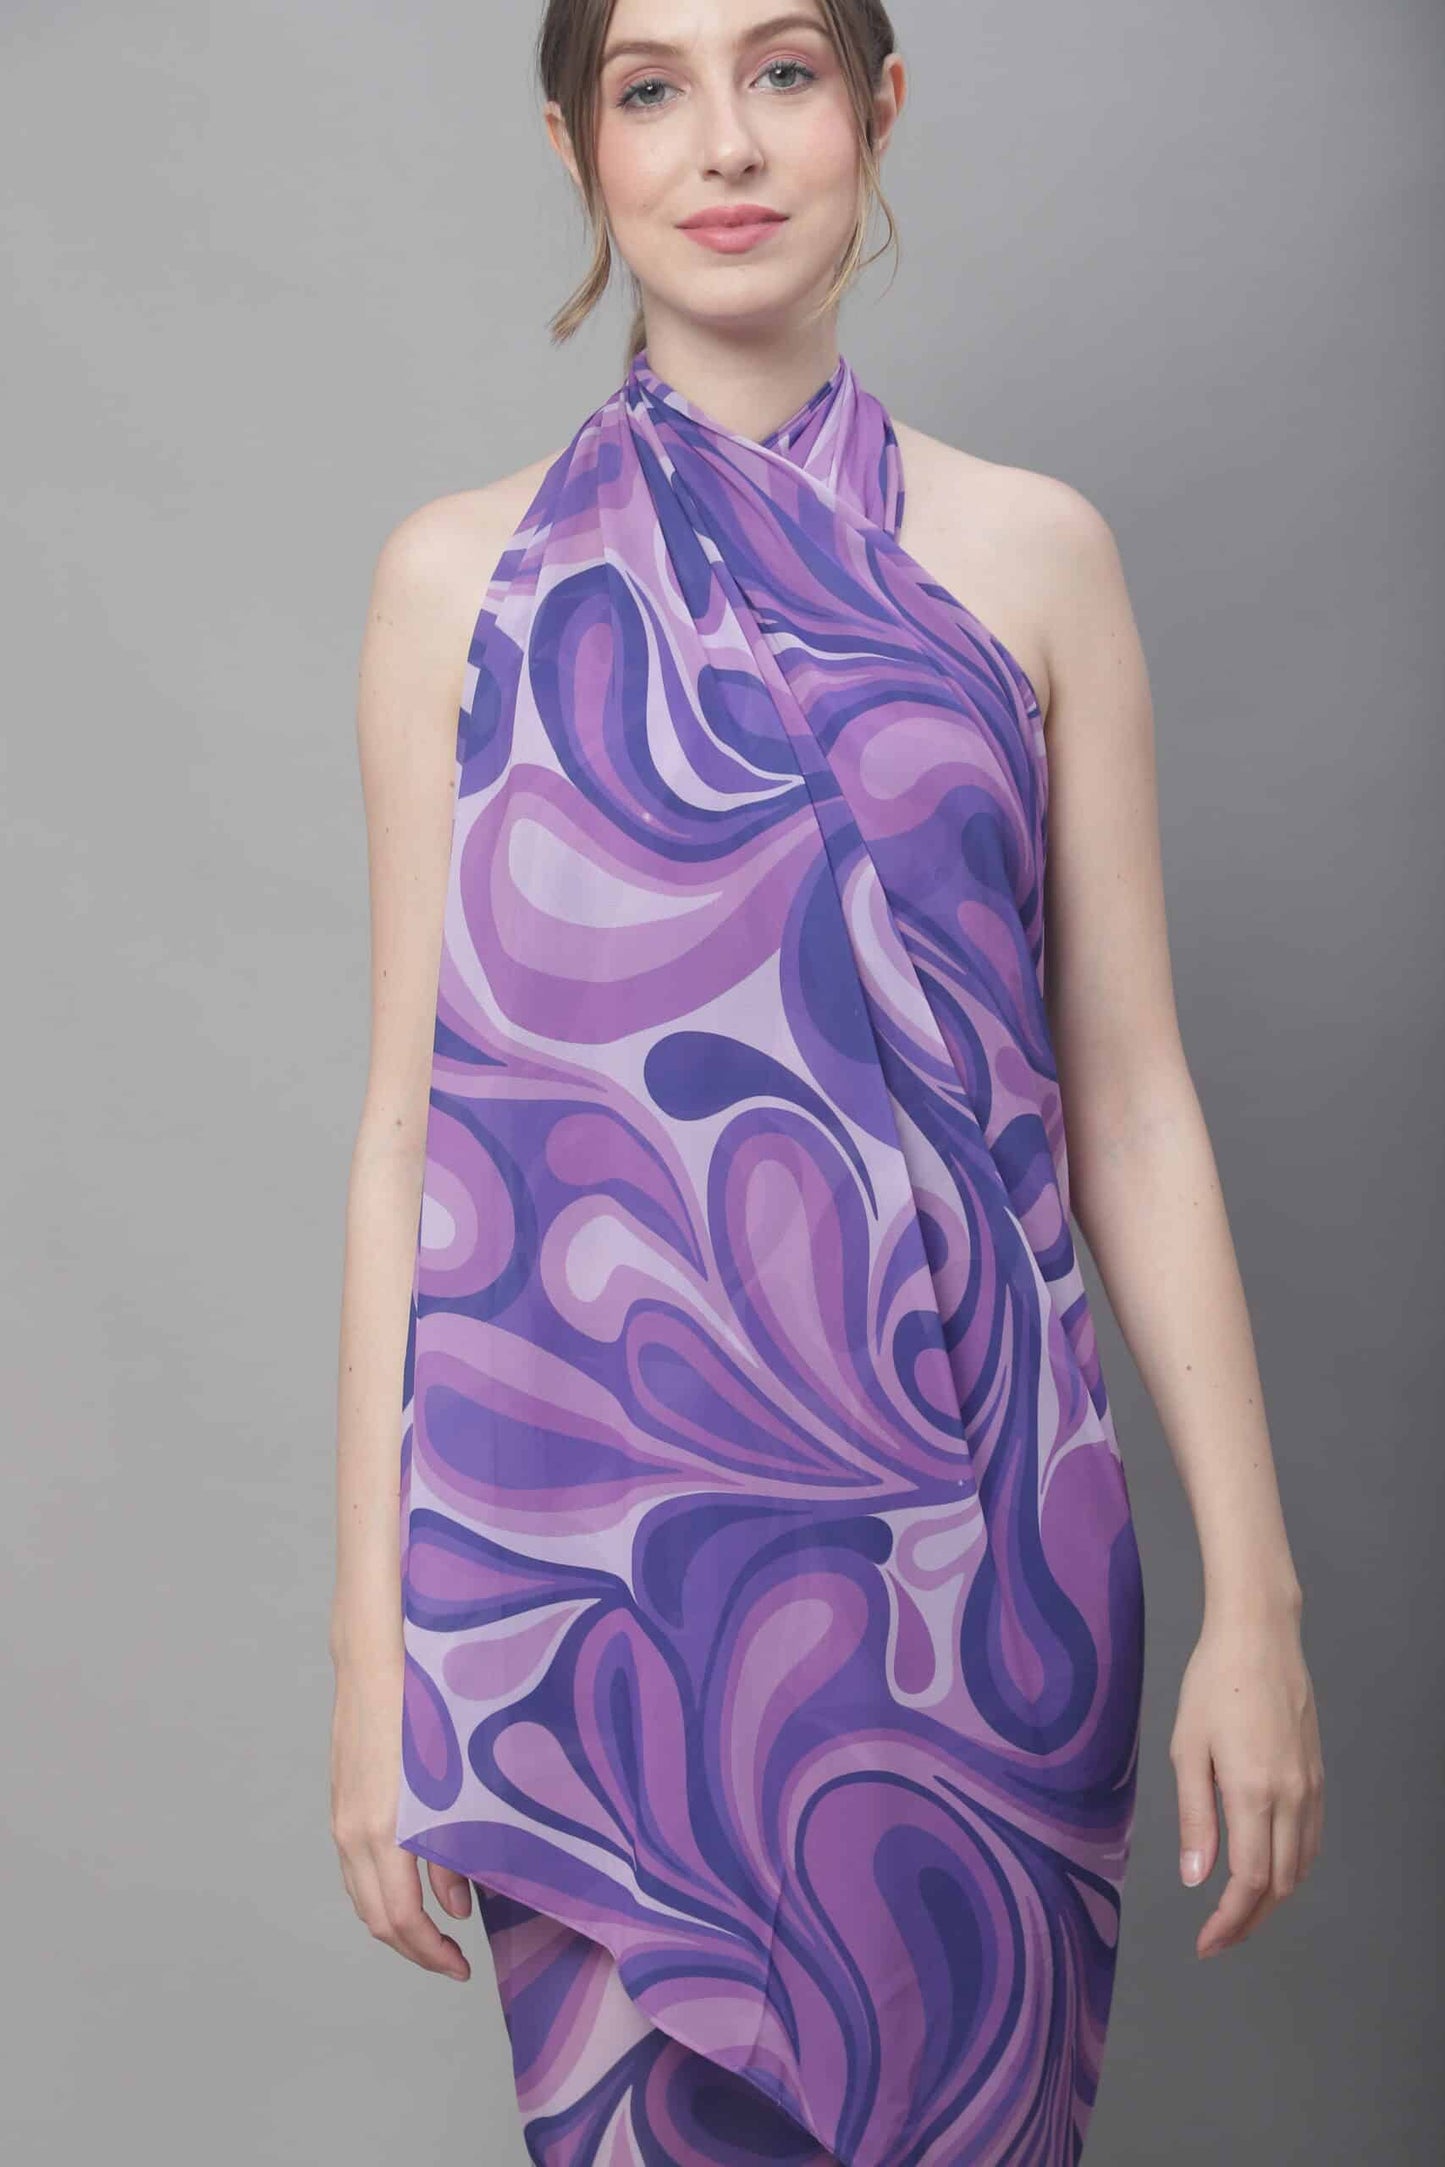 Purple Color Abstract Printed Georgette Coverup Beachwear Sarong For Woman Claura Designs Pvt. Ltd. Sarong Beachwear, Cover-up, Coverup, Free Size, georgette, Purple, Sarong, Swimwear